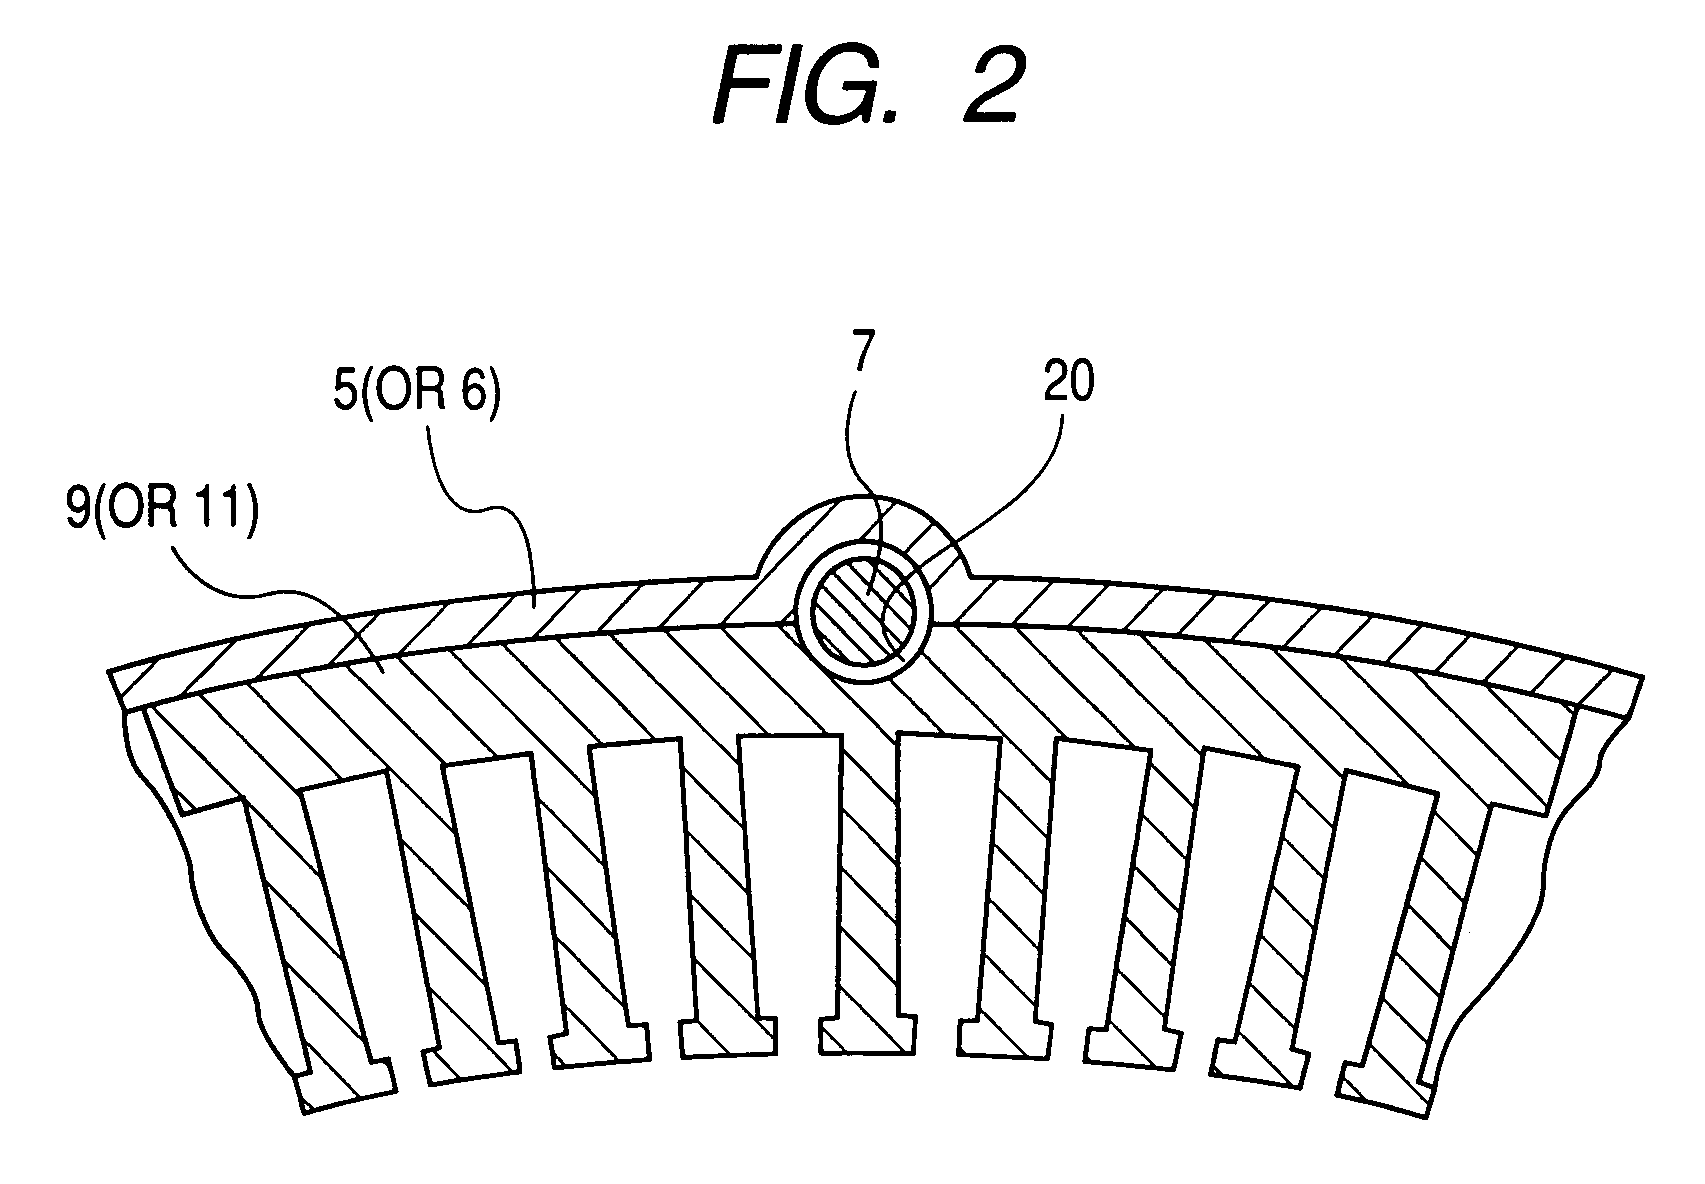 Automotive tandem alternator having reduced axial length and capable of effectively suppressing magnetic leakage